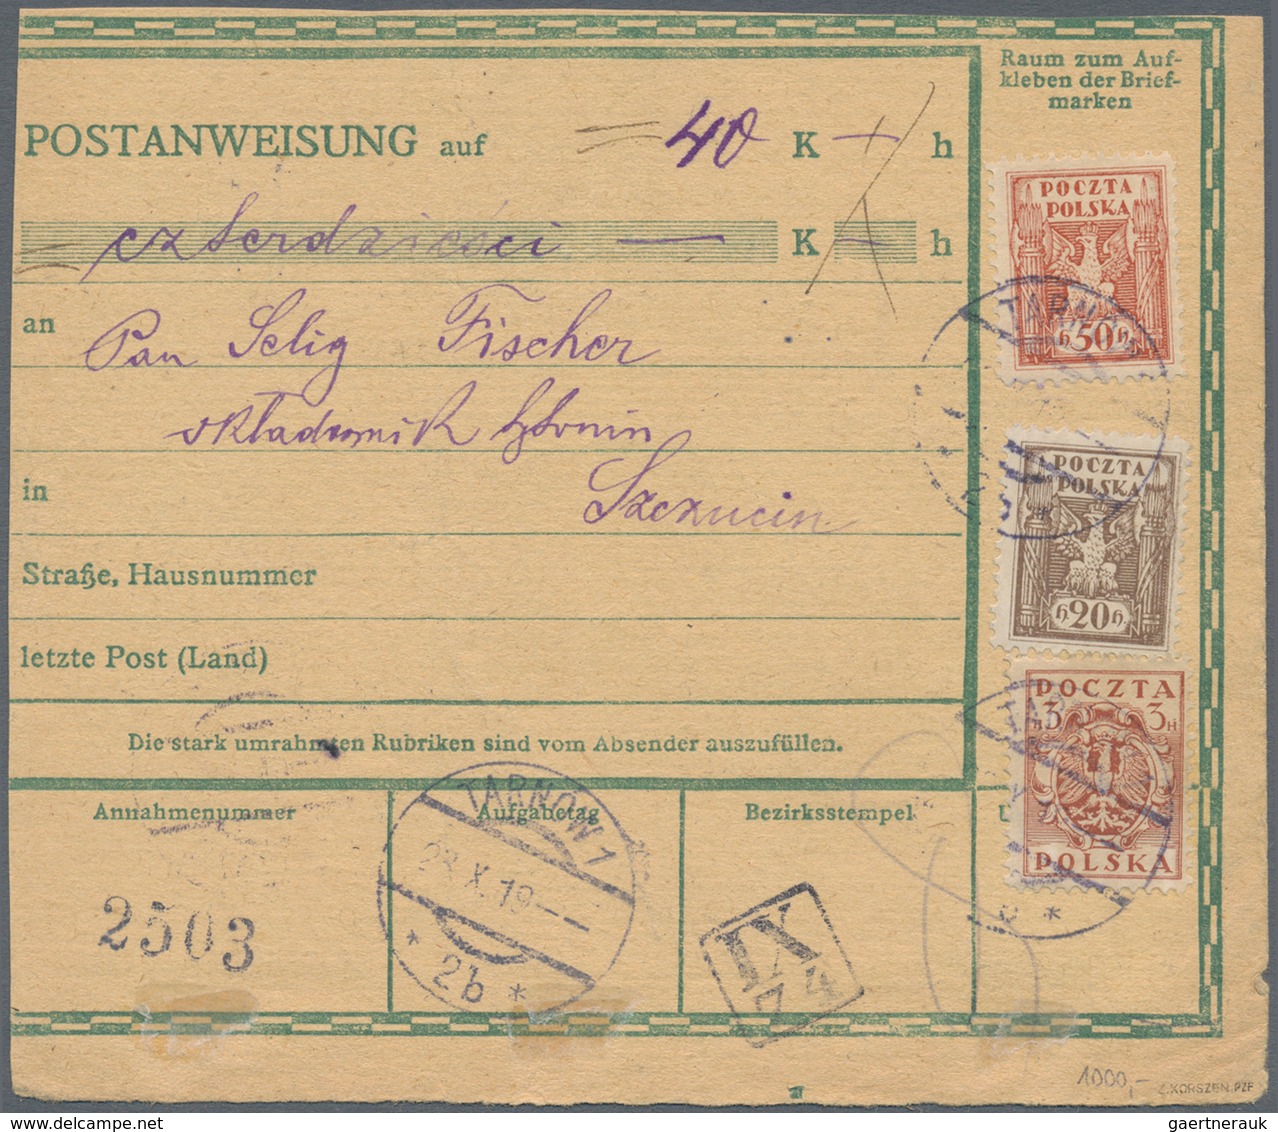 01572 Polen - Lokalausgaben 1915/19: 1919/1923 (ca): 132 postal orders franked with postage due stamps fro